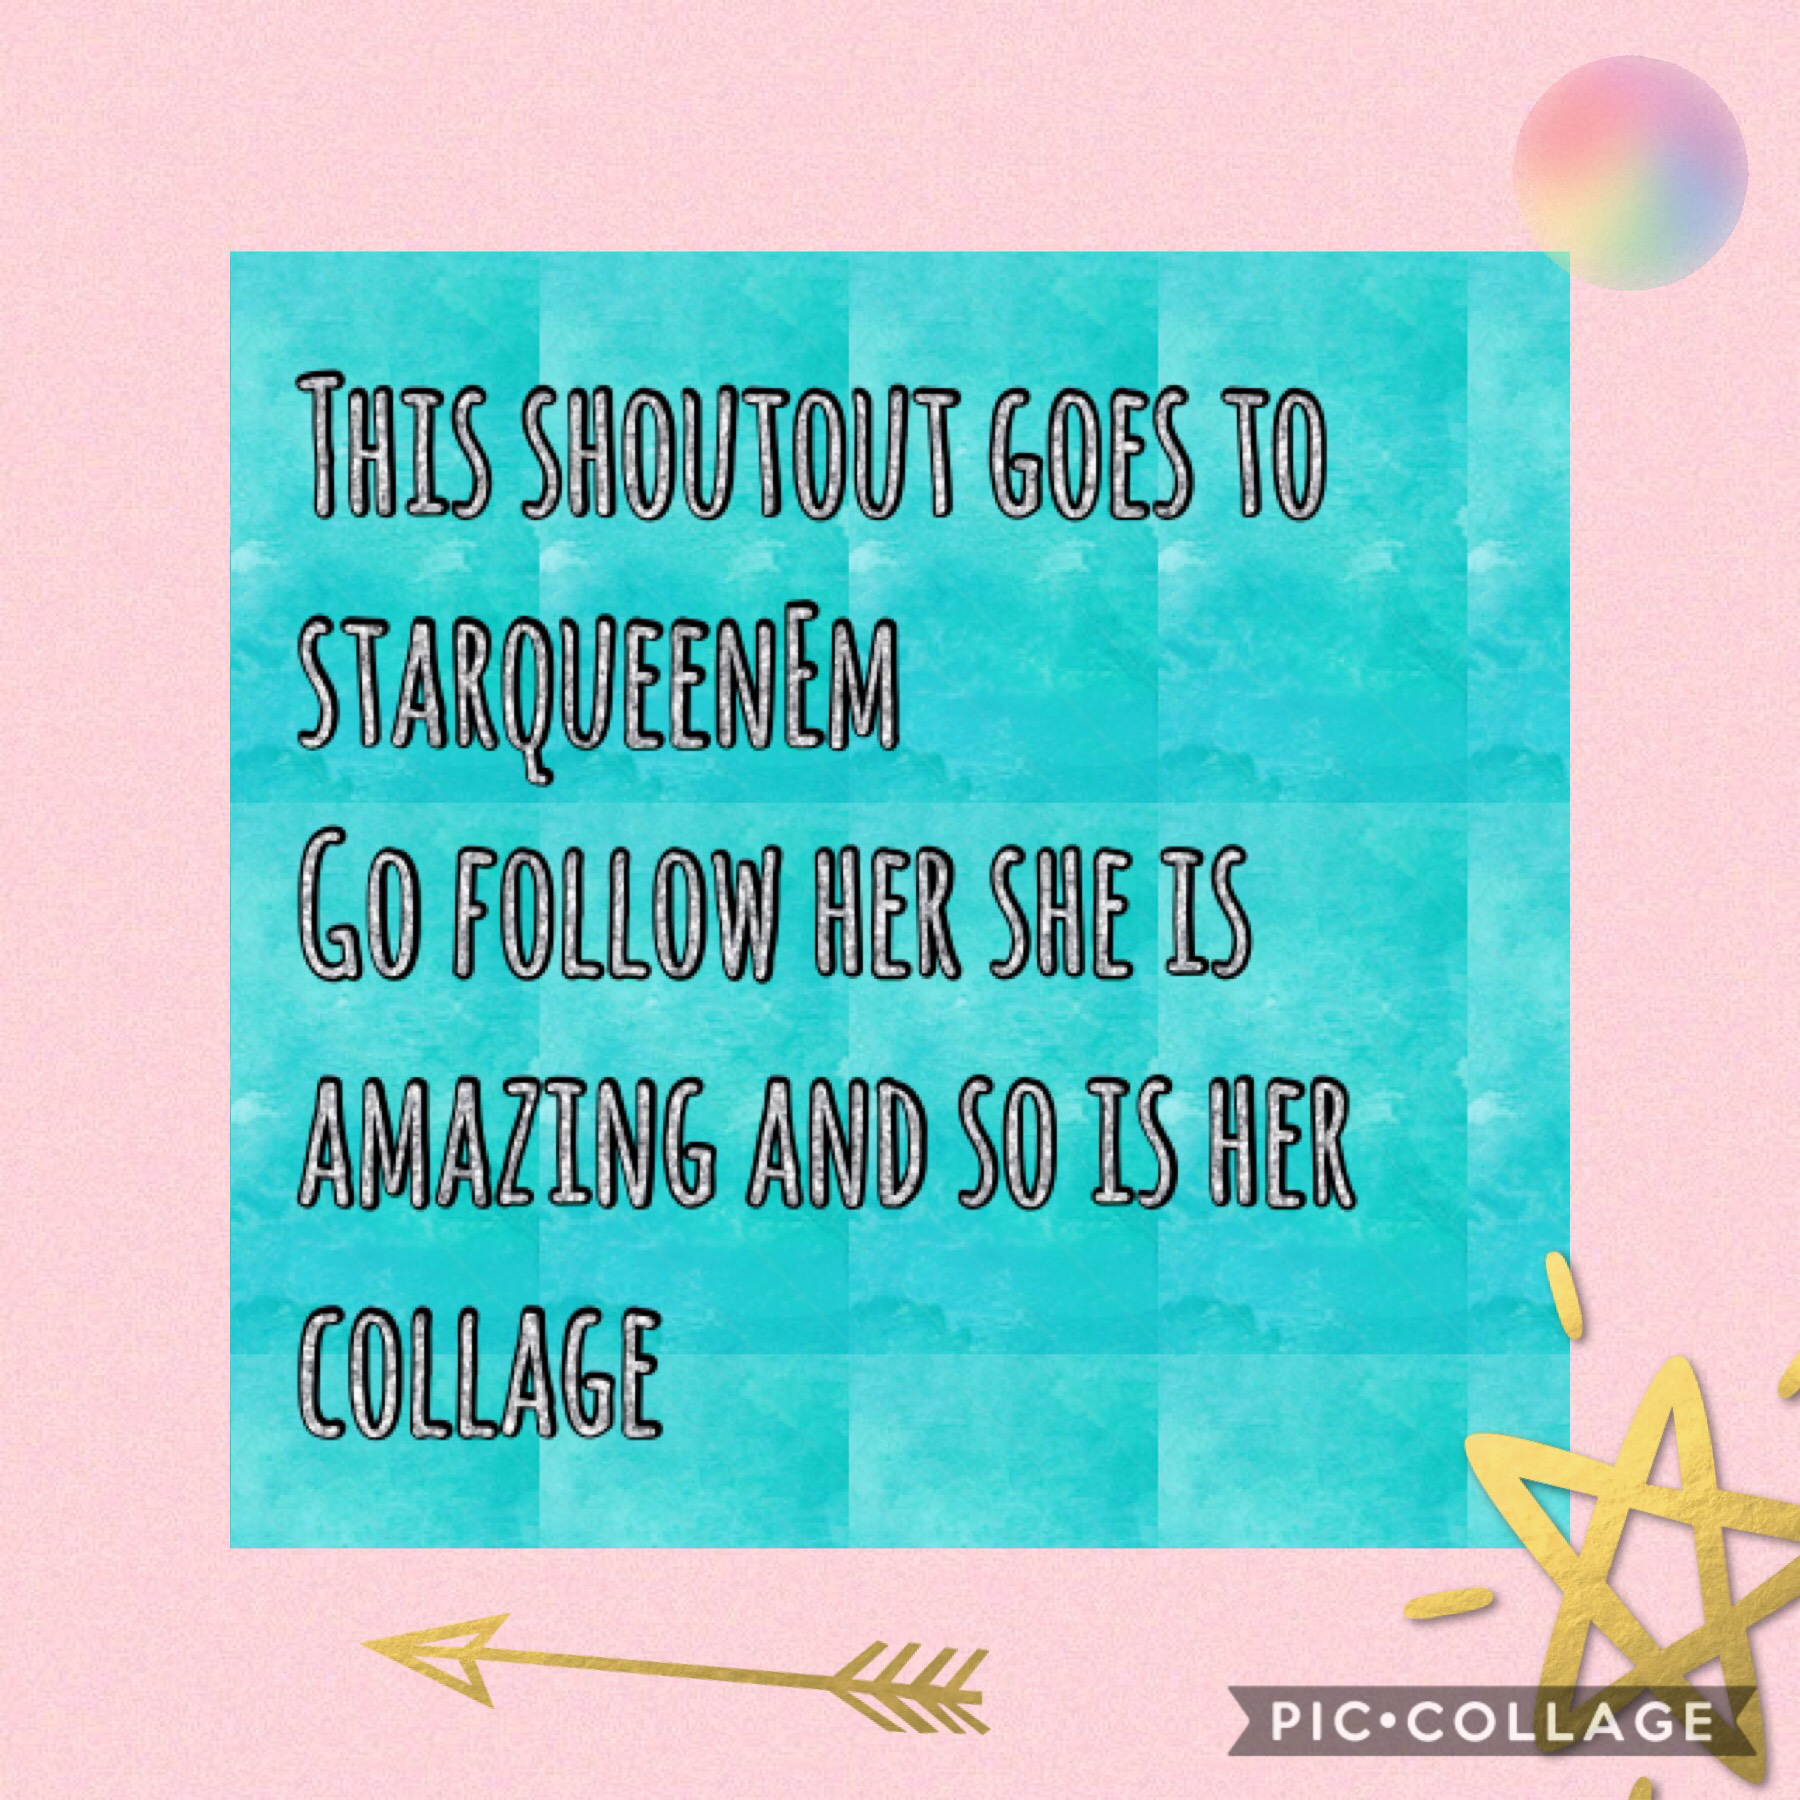 Go follow her here is her name 
     StarQueenEm
          
                         